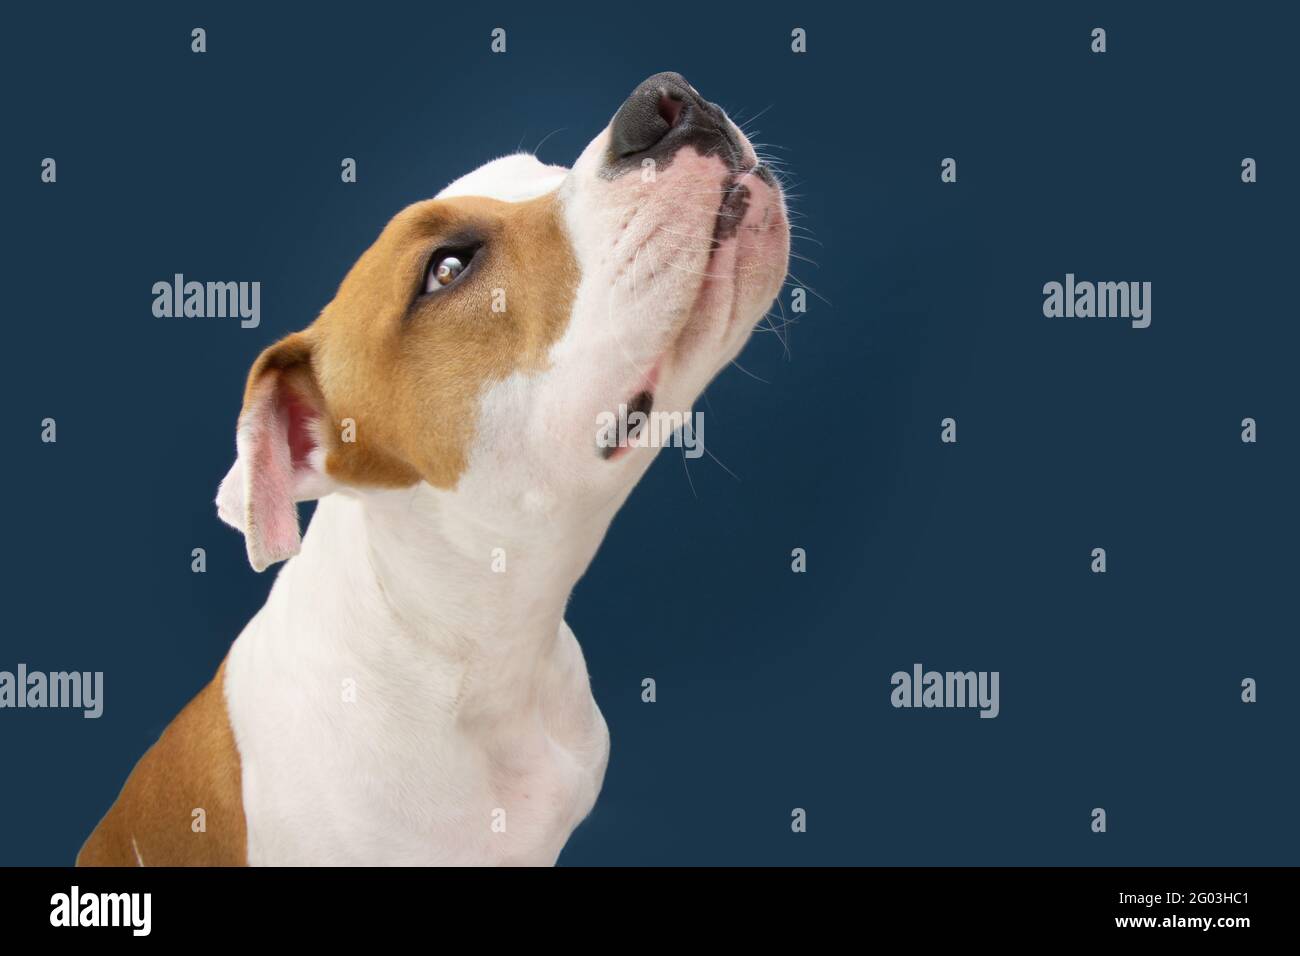 Funny American Staffordshire dog looking up begging food. Isolated on dark blue background Stock Photo